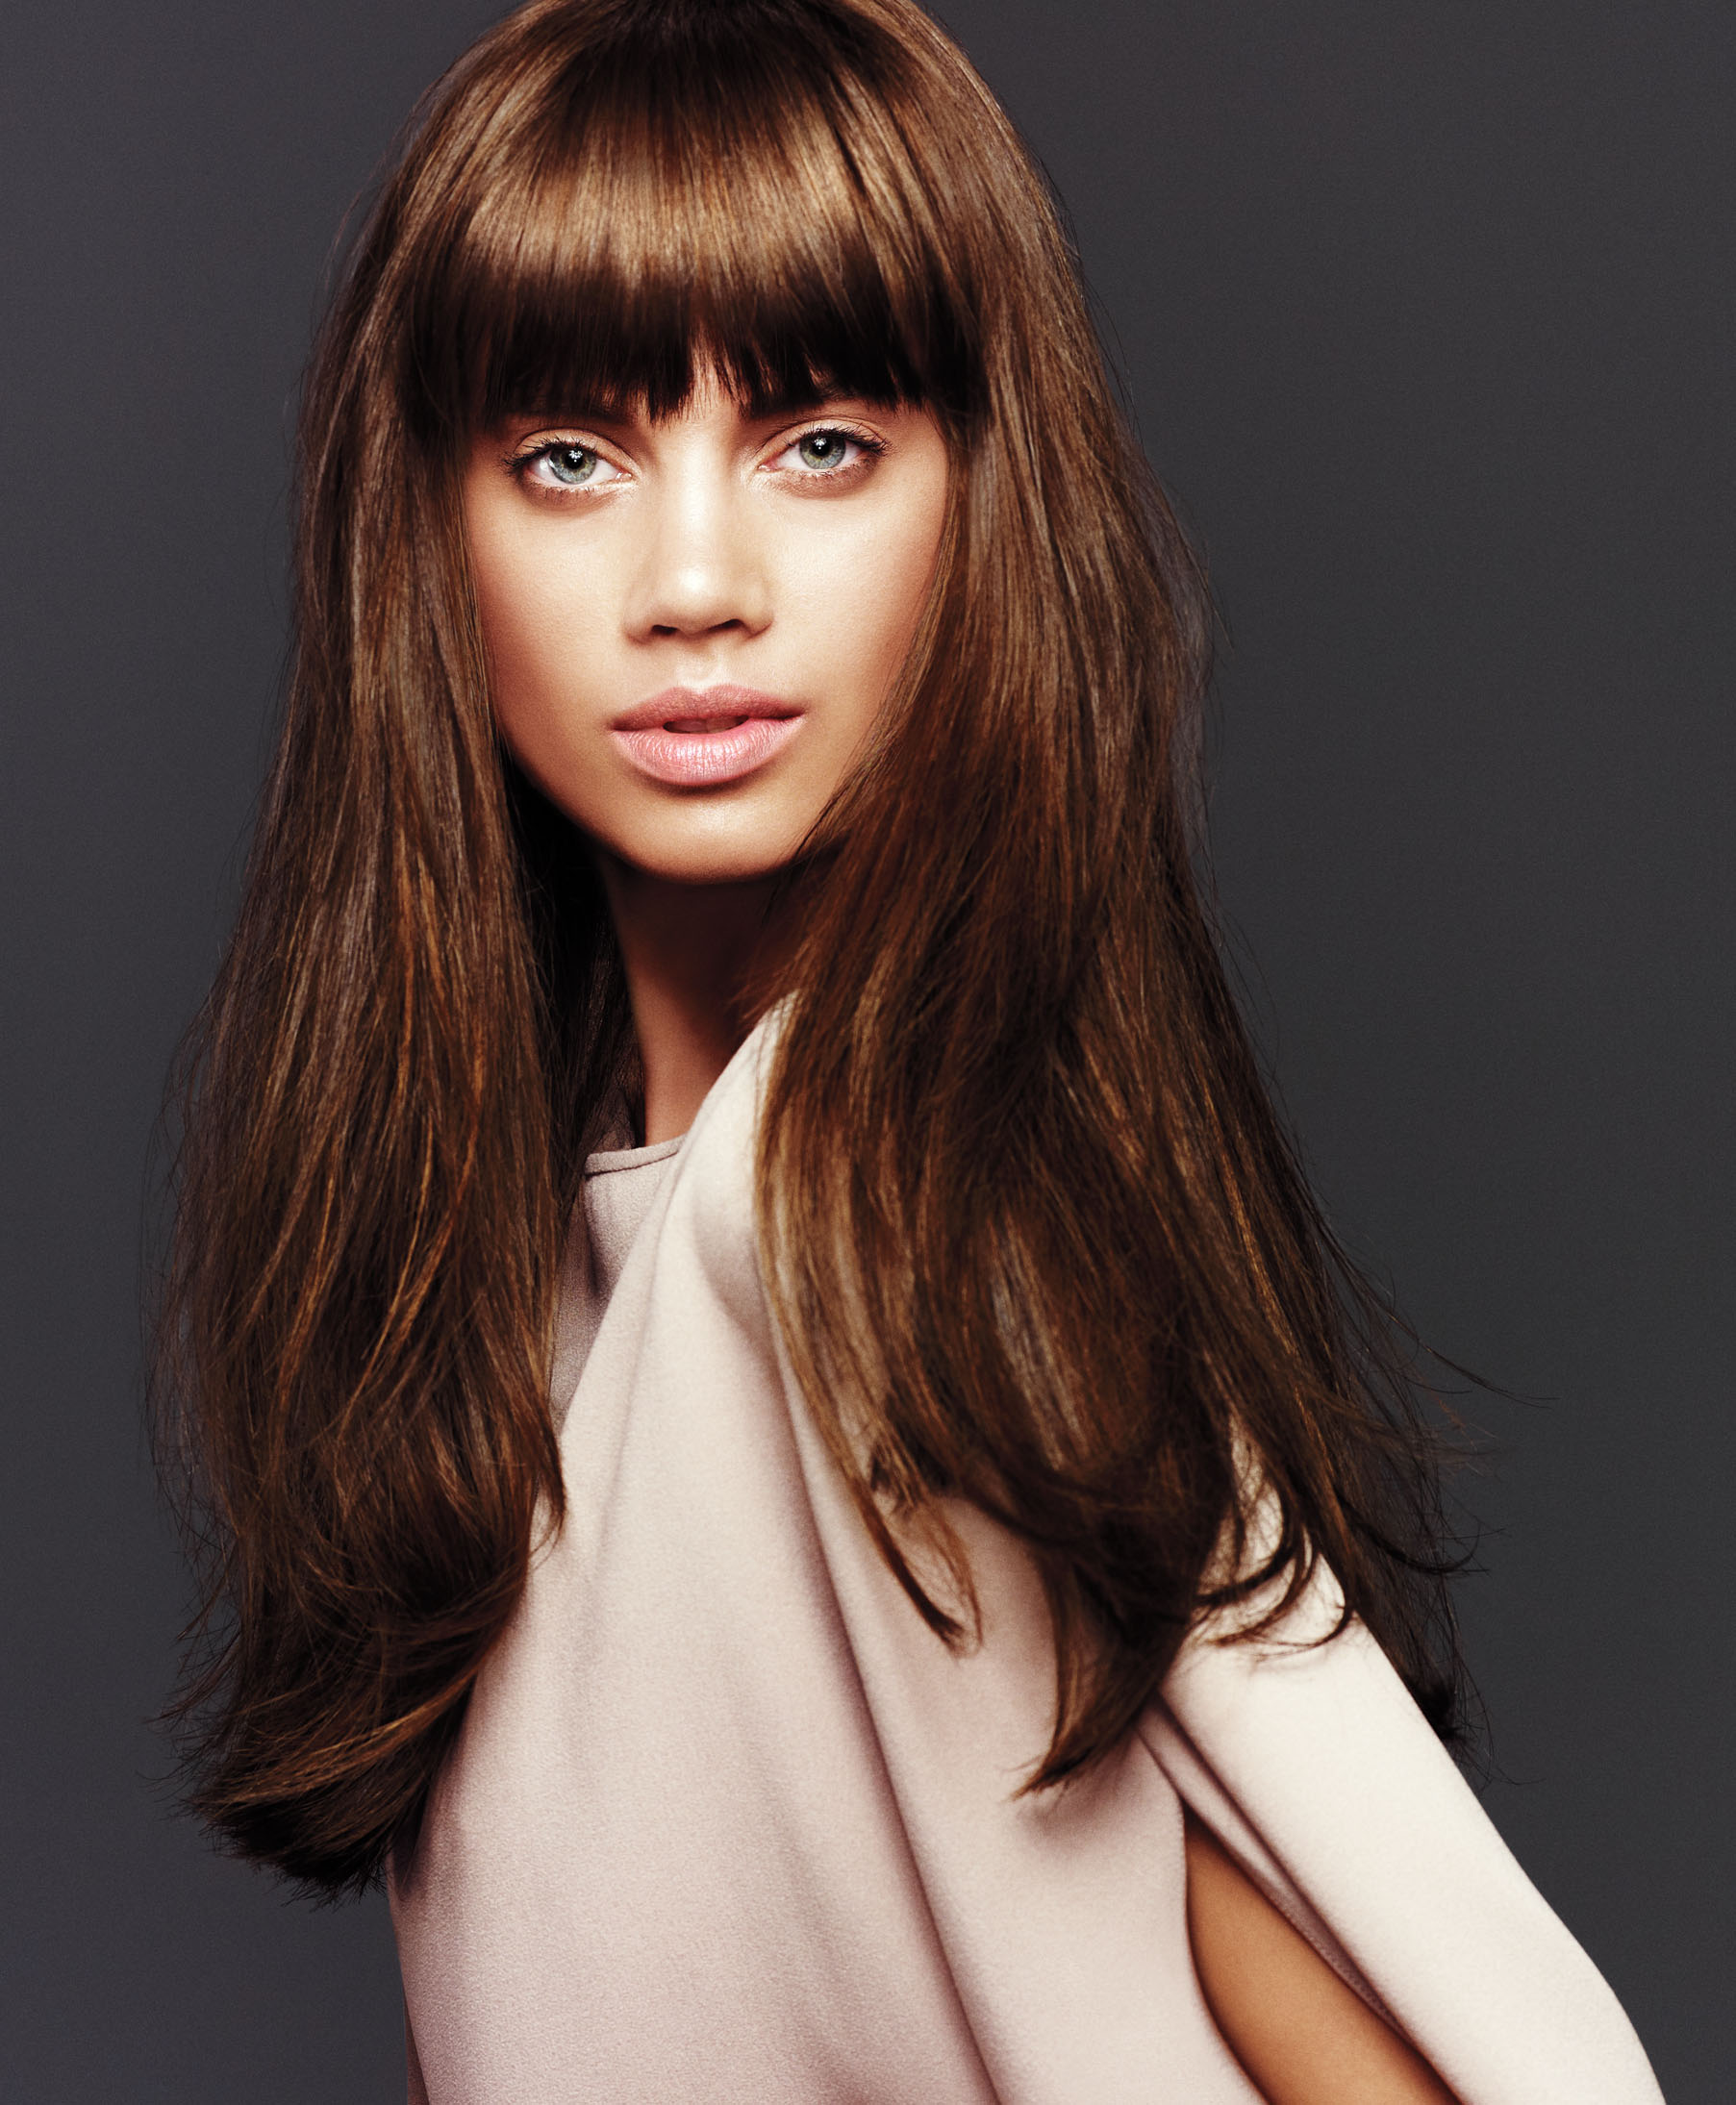 goldwell professional hair color photo - 8